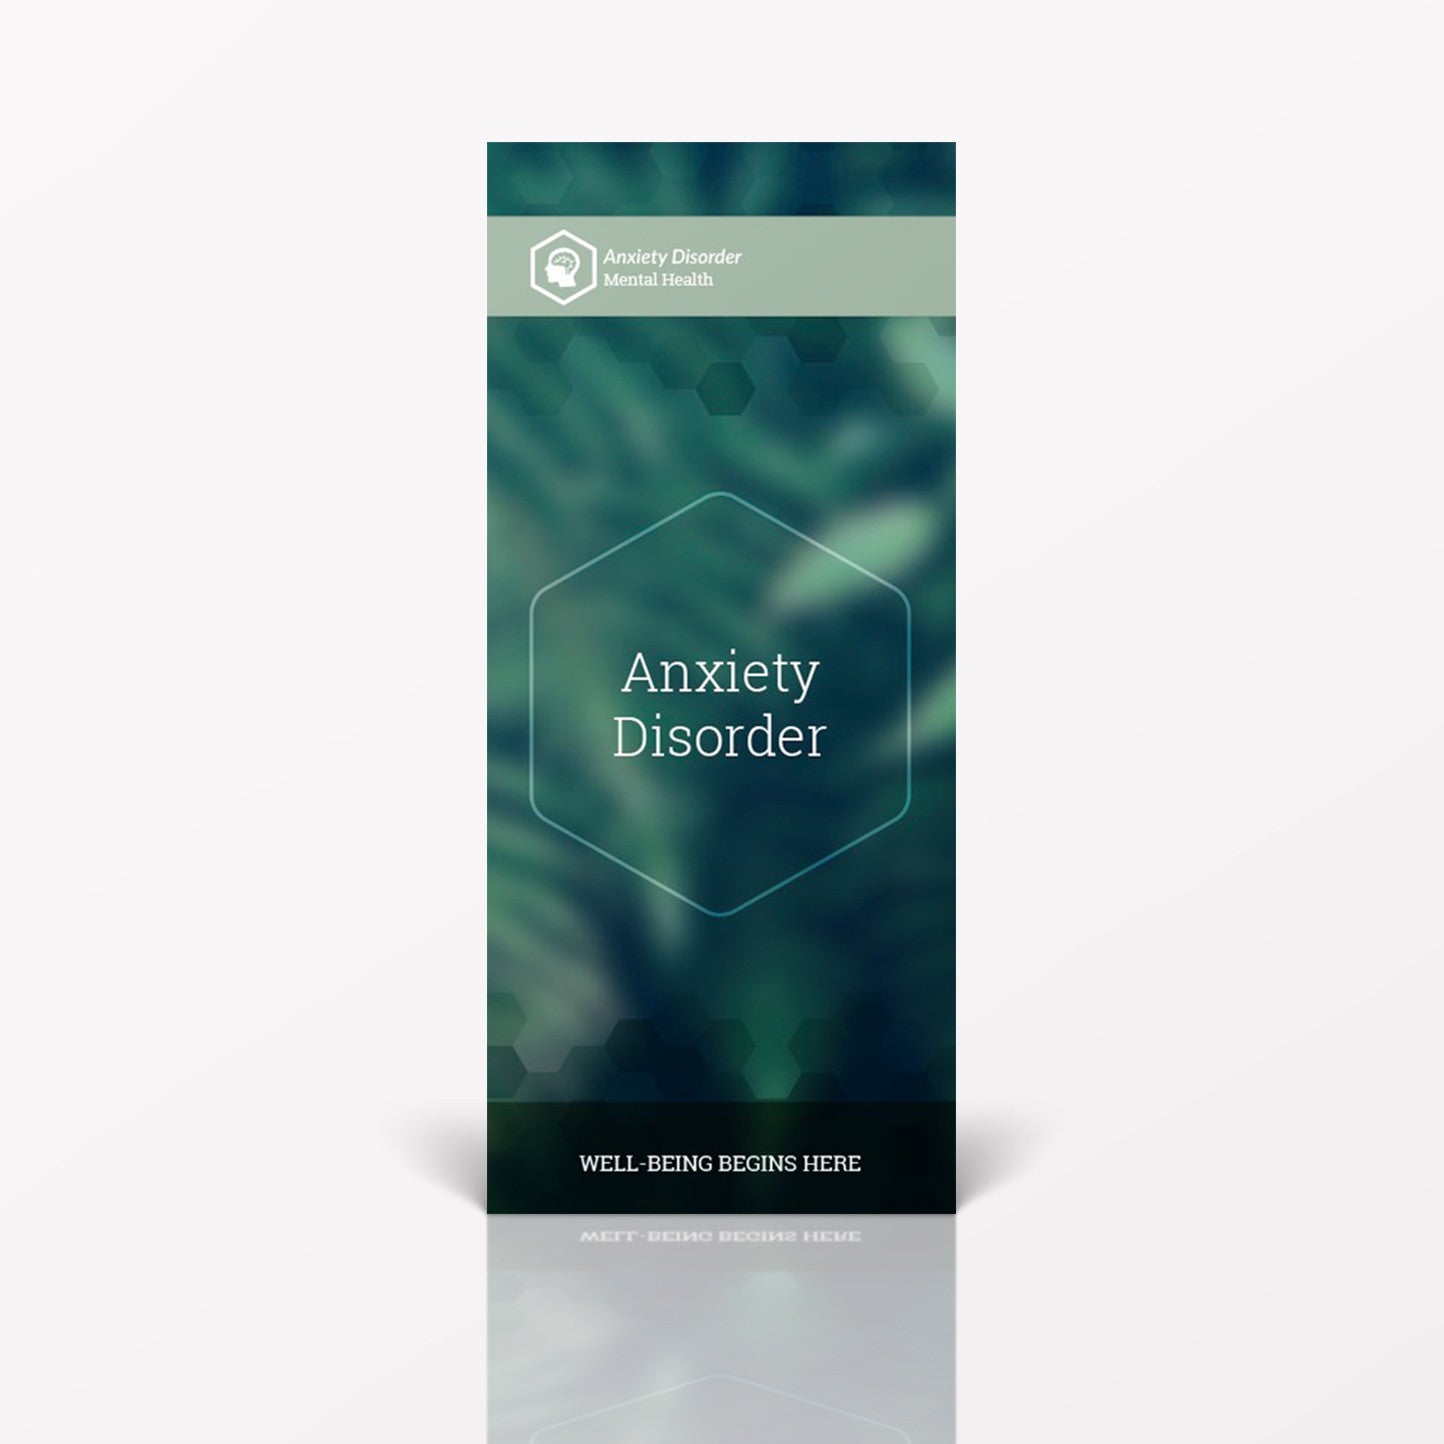 Anxiety Disorder pamphlet/brochure (6064M1)